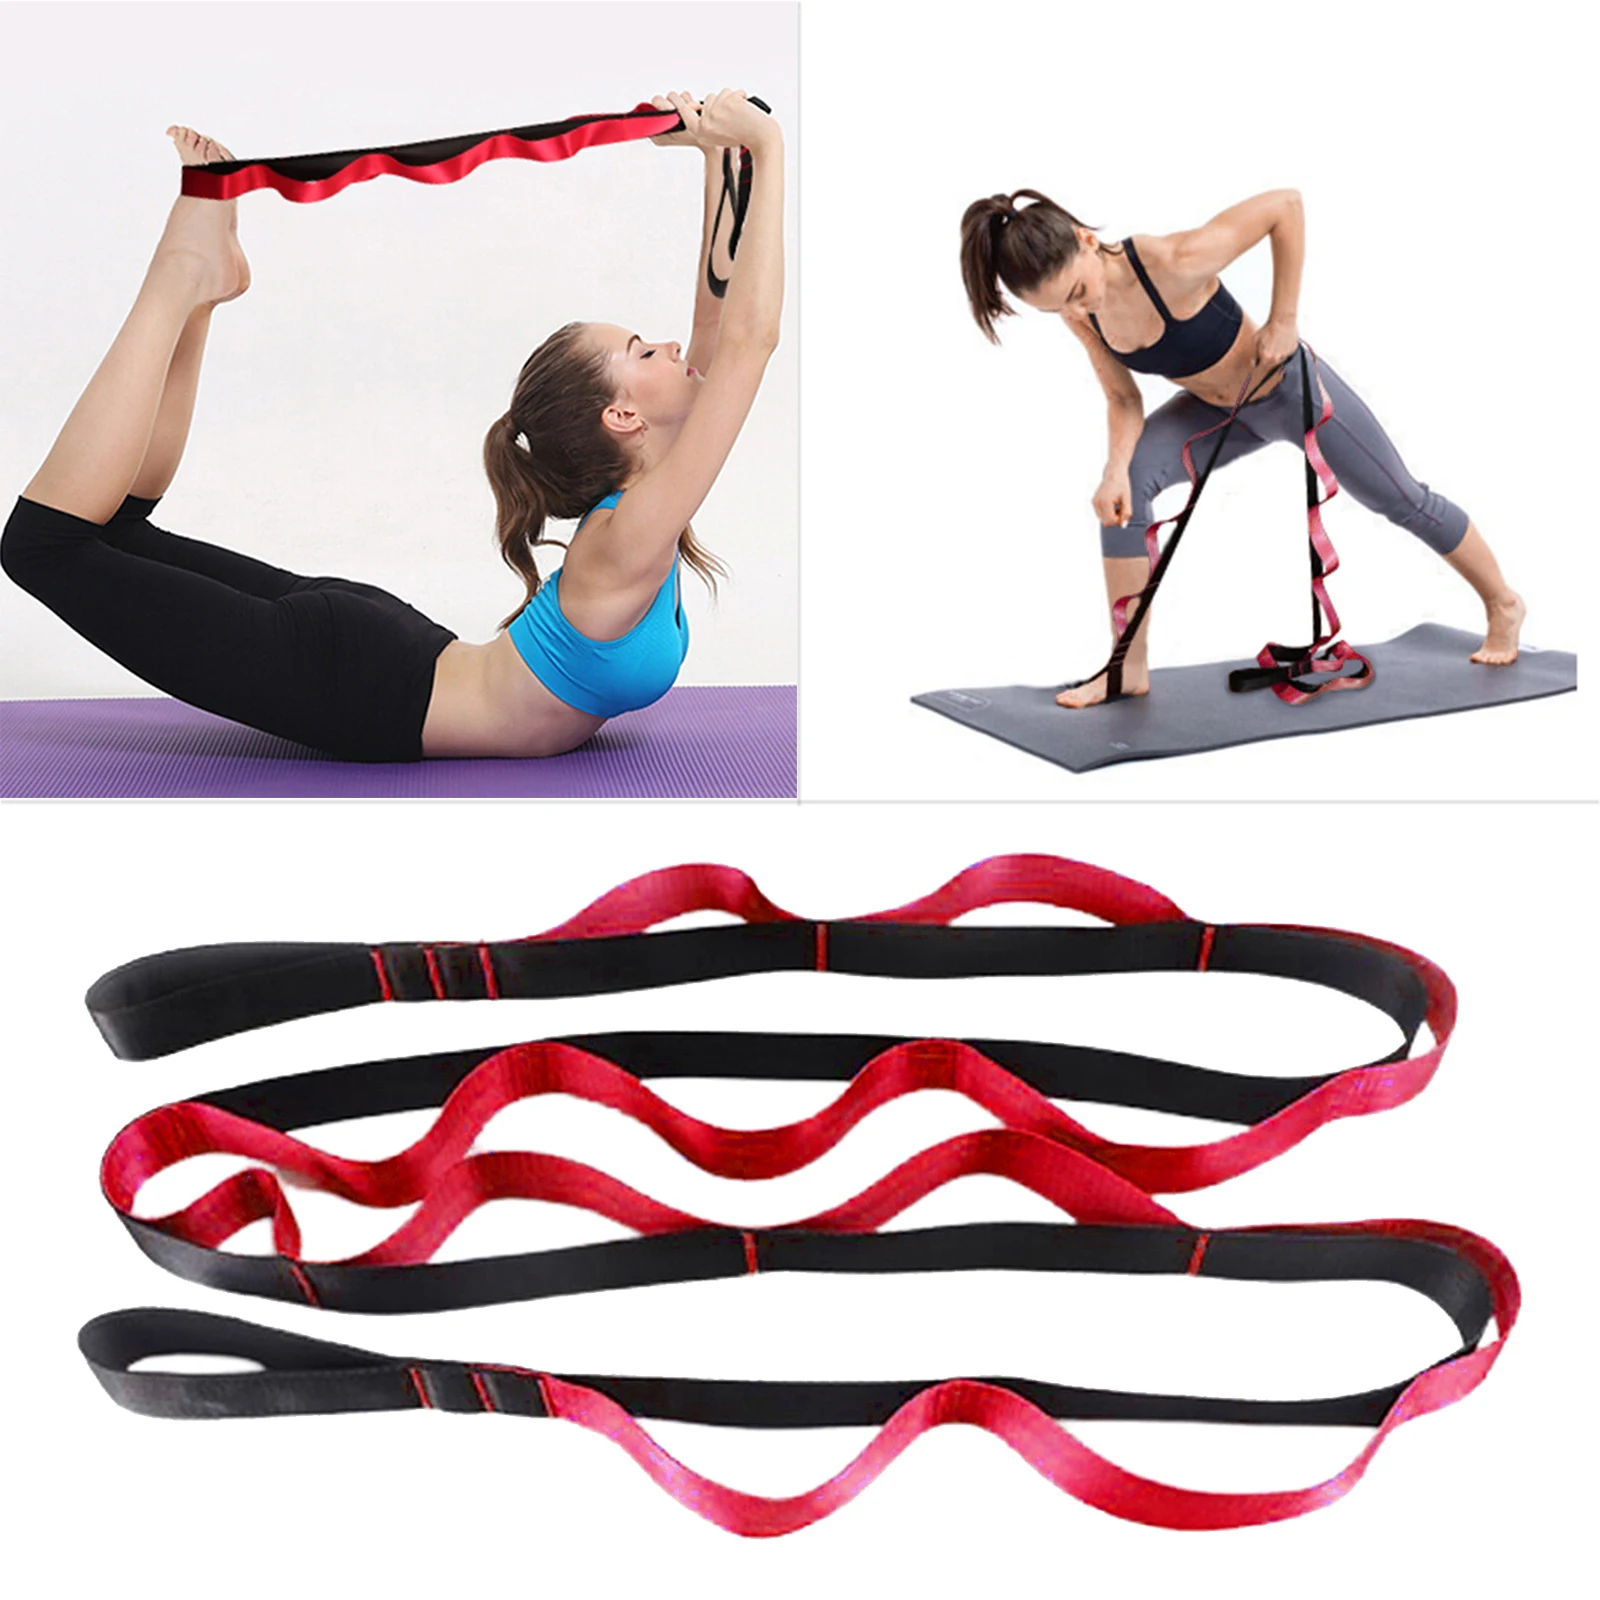 Exercise Stretchy Strap Dance Elastic Pull Belt Workout Gym Body Bands